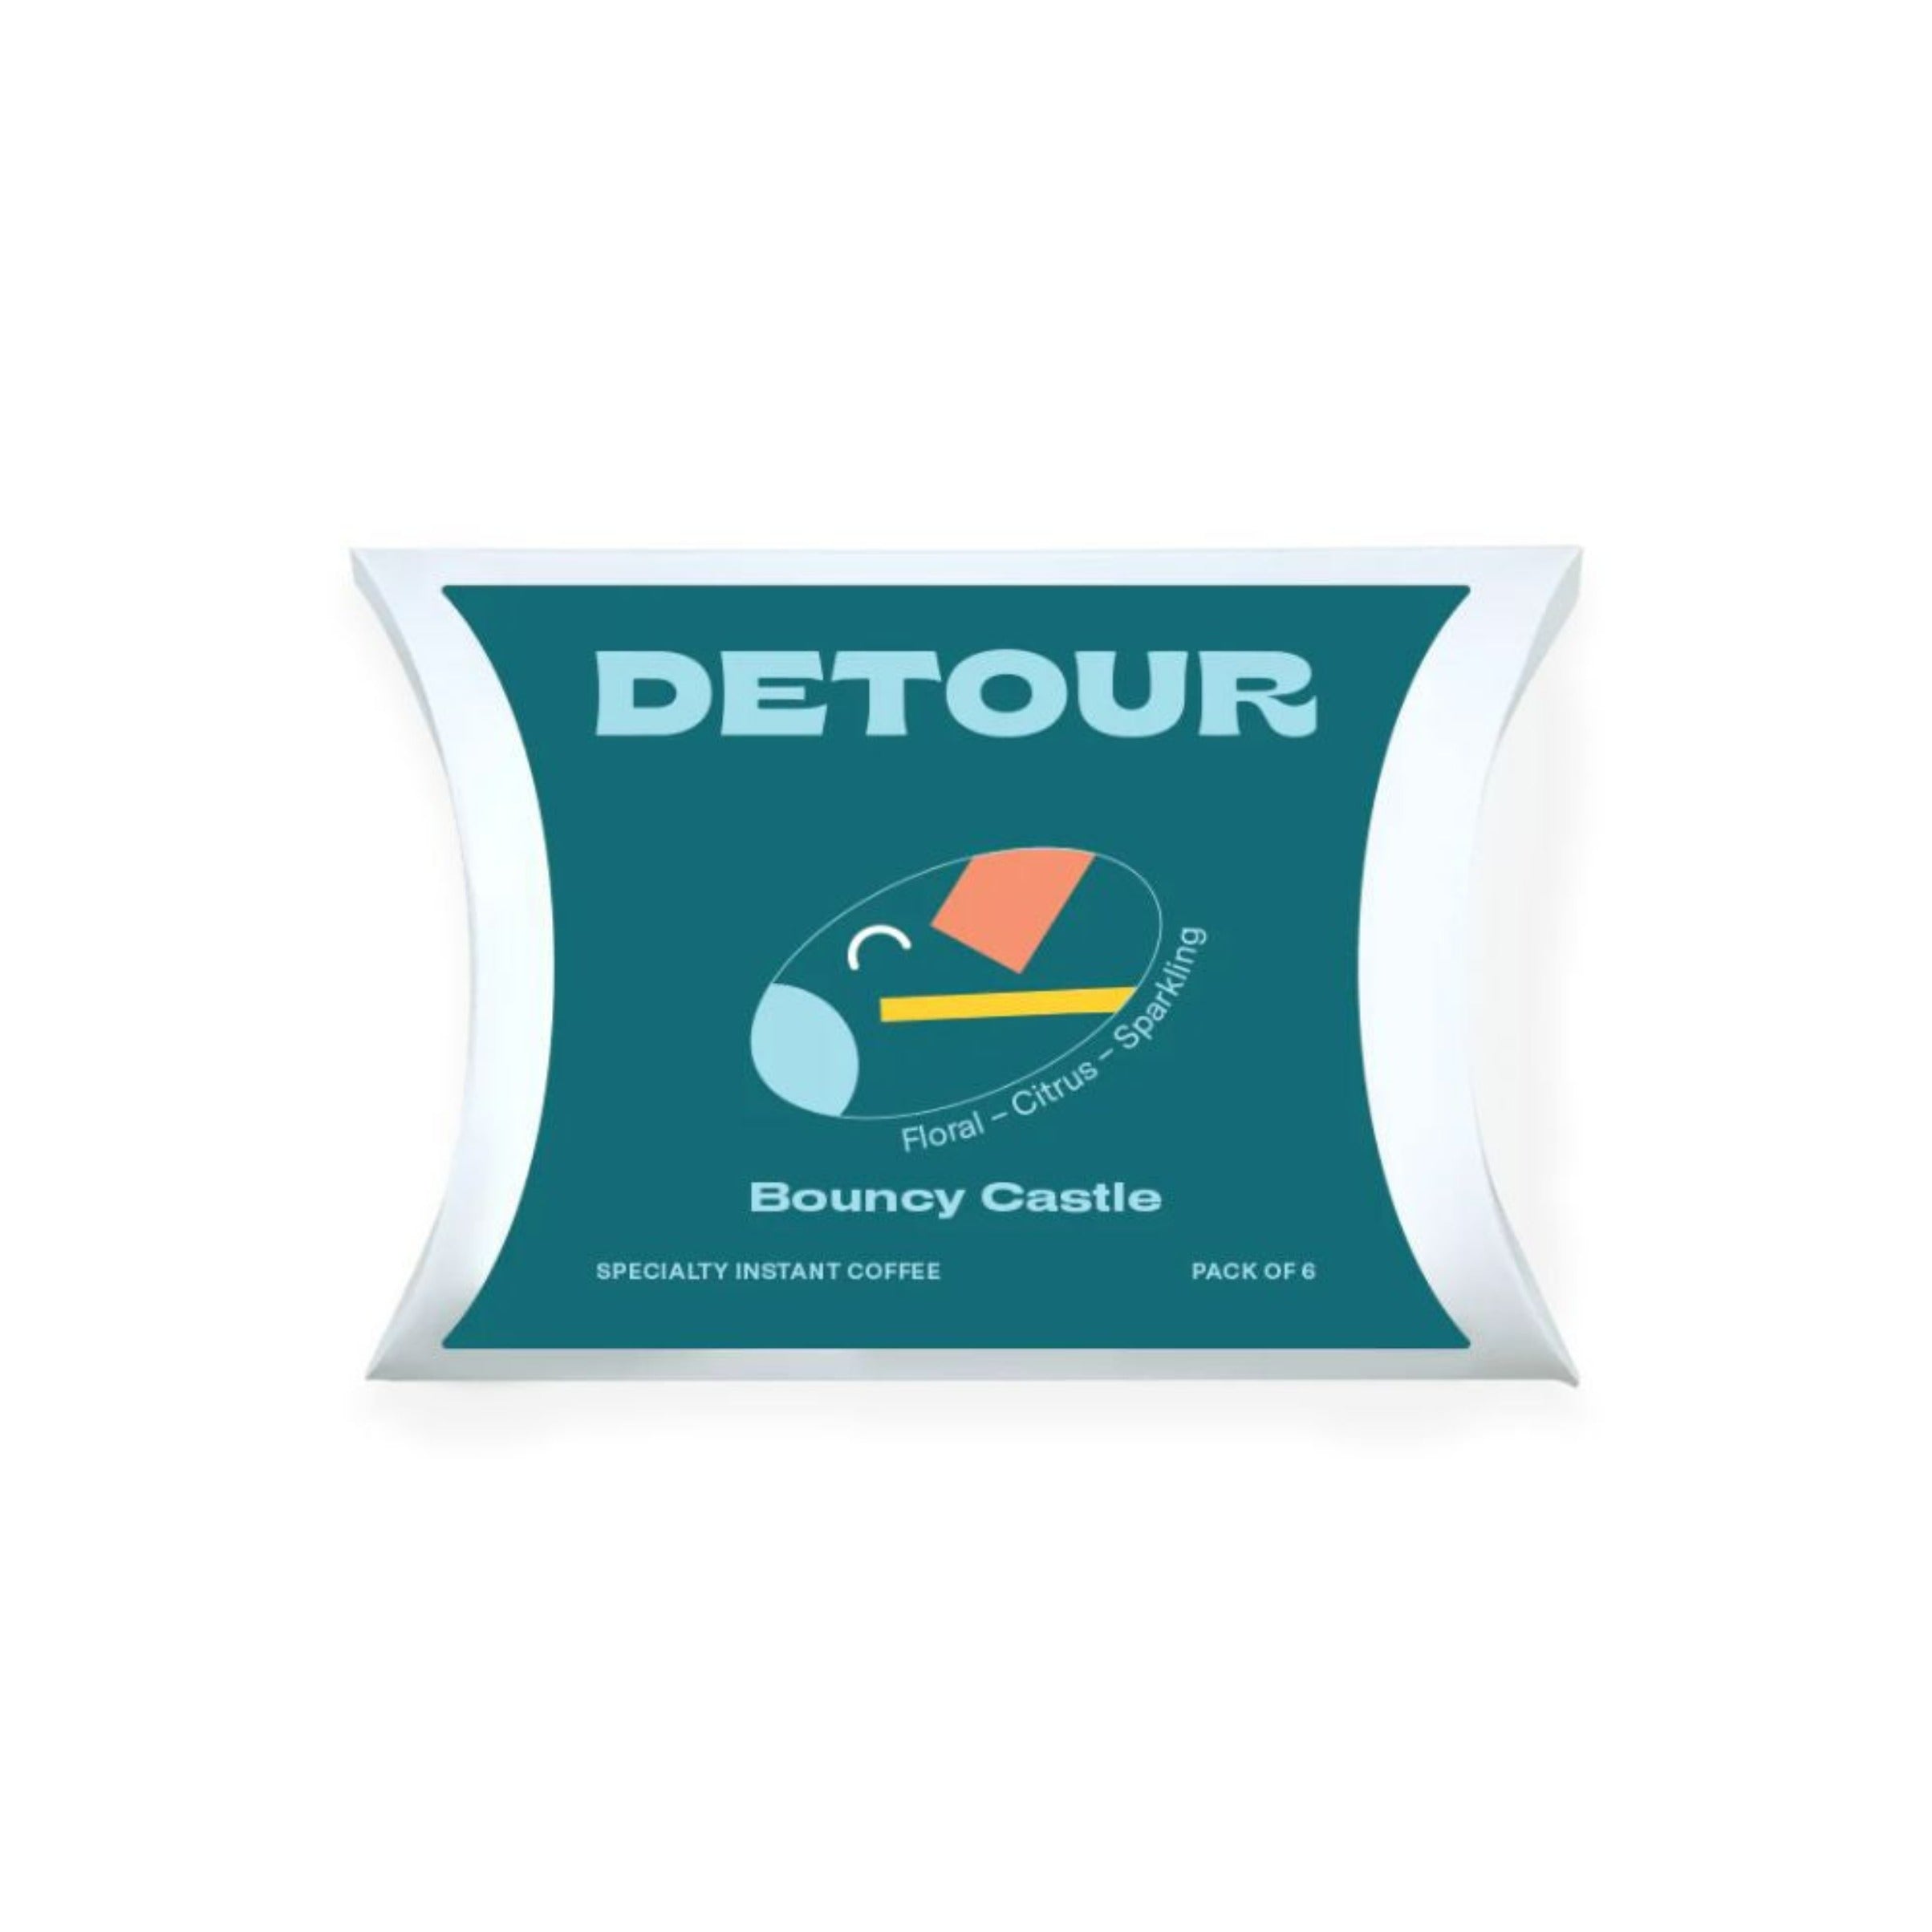 Detour Coffee Roaster Bouncy Castle Instant Coffee - Floral, Citrus, Milk Chocolate Tasting Profile - Making a Great Coffee Just Got Easier! Specialty Instant Coffee - Ethiopia Sidamo Origin - Various Smallholders Producer - Local Landraces Variety - Washed Process - Learn More on Our Website